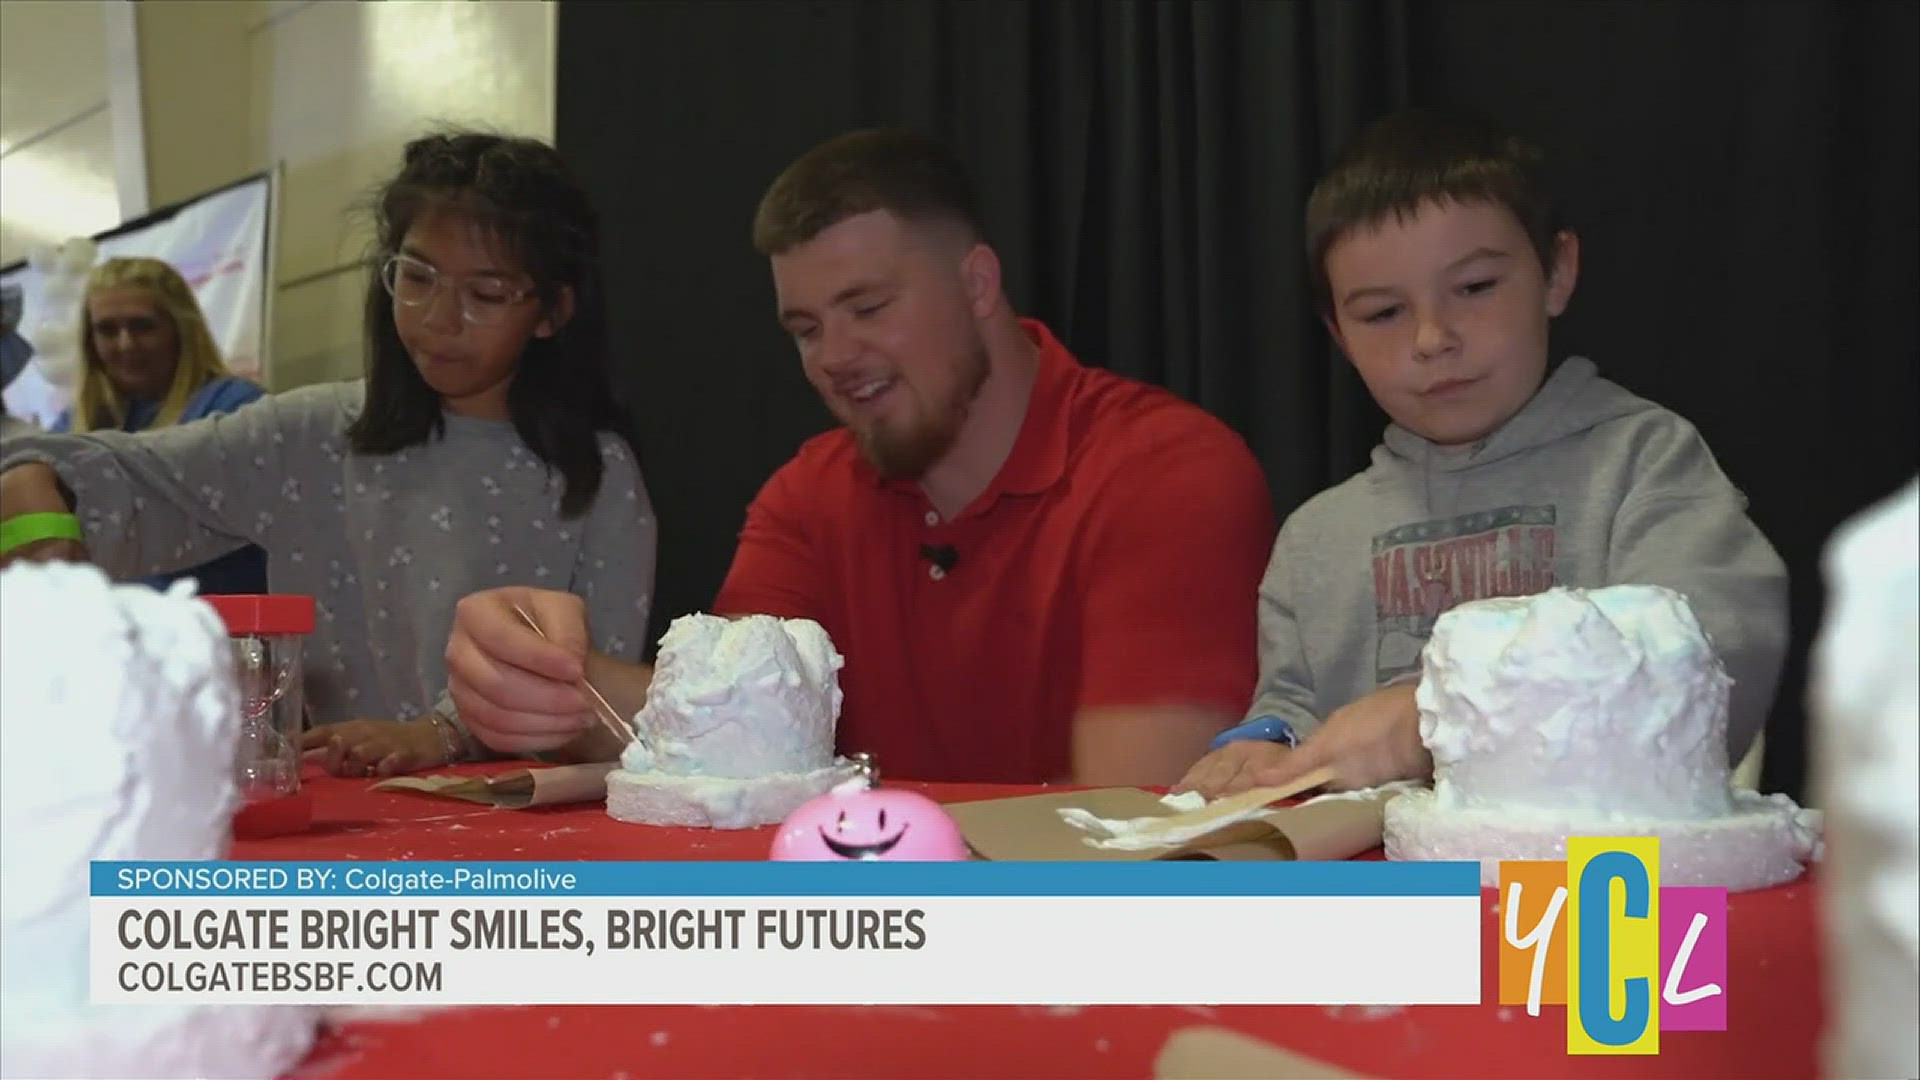 Smile Fest is part of Colgate's program that provides access to resources and tools to encourage healthy habits early on. Sponsored by Colgate-Palmolive.